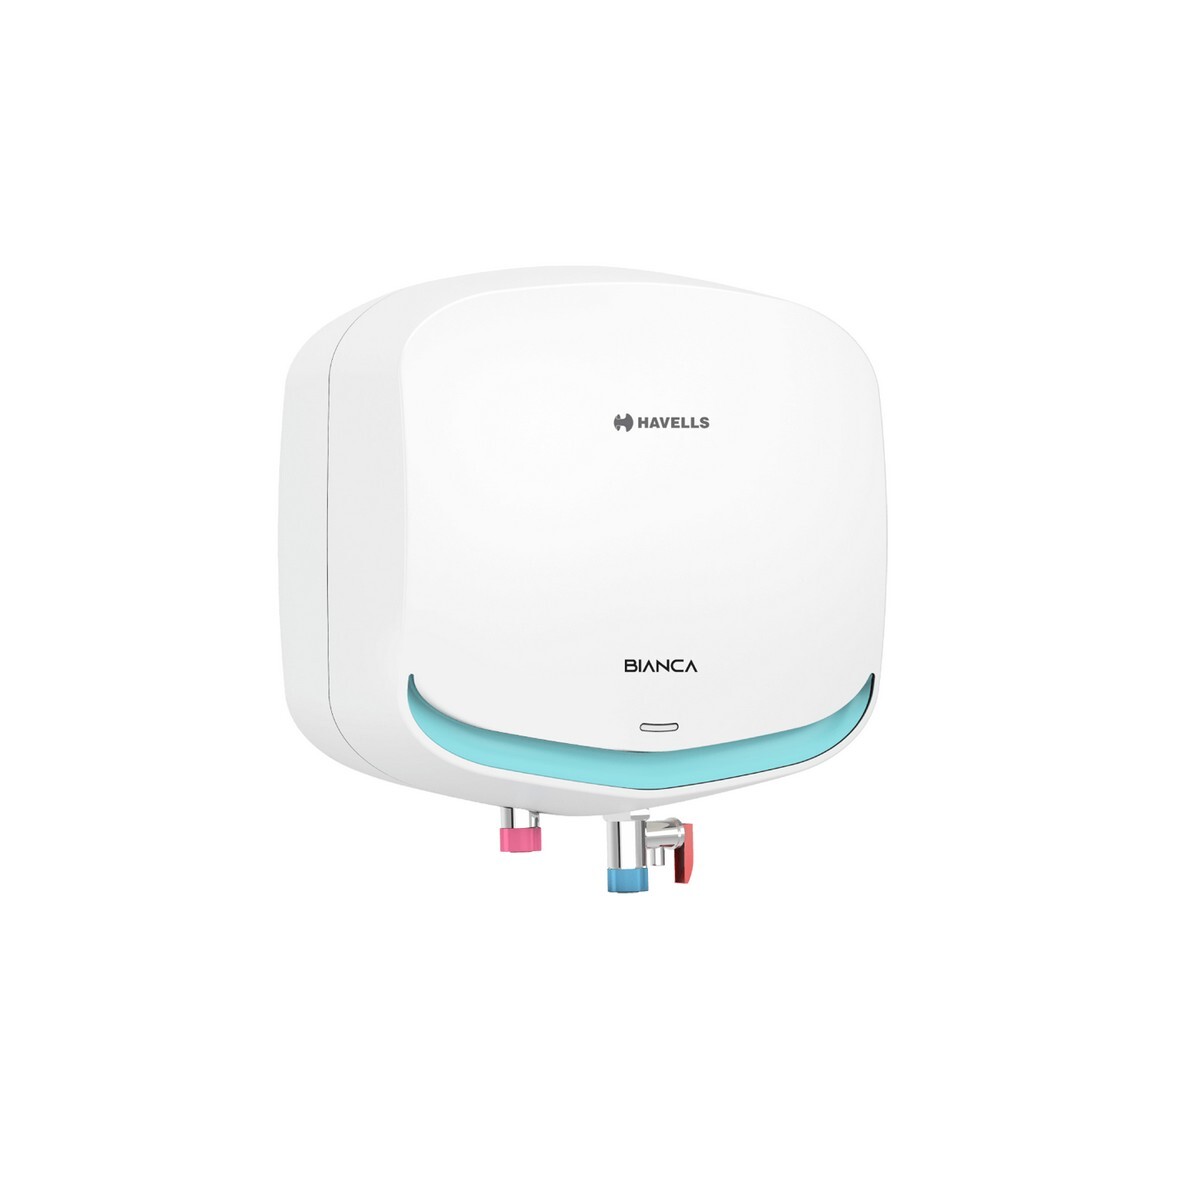 Havells 3L Water Heater Bianca White Blue